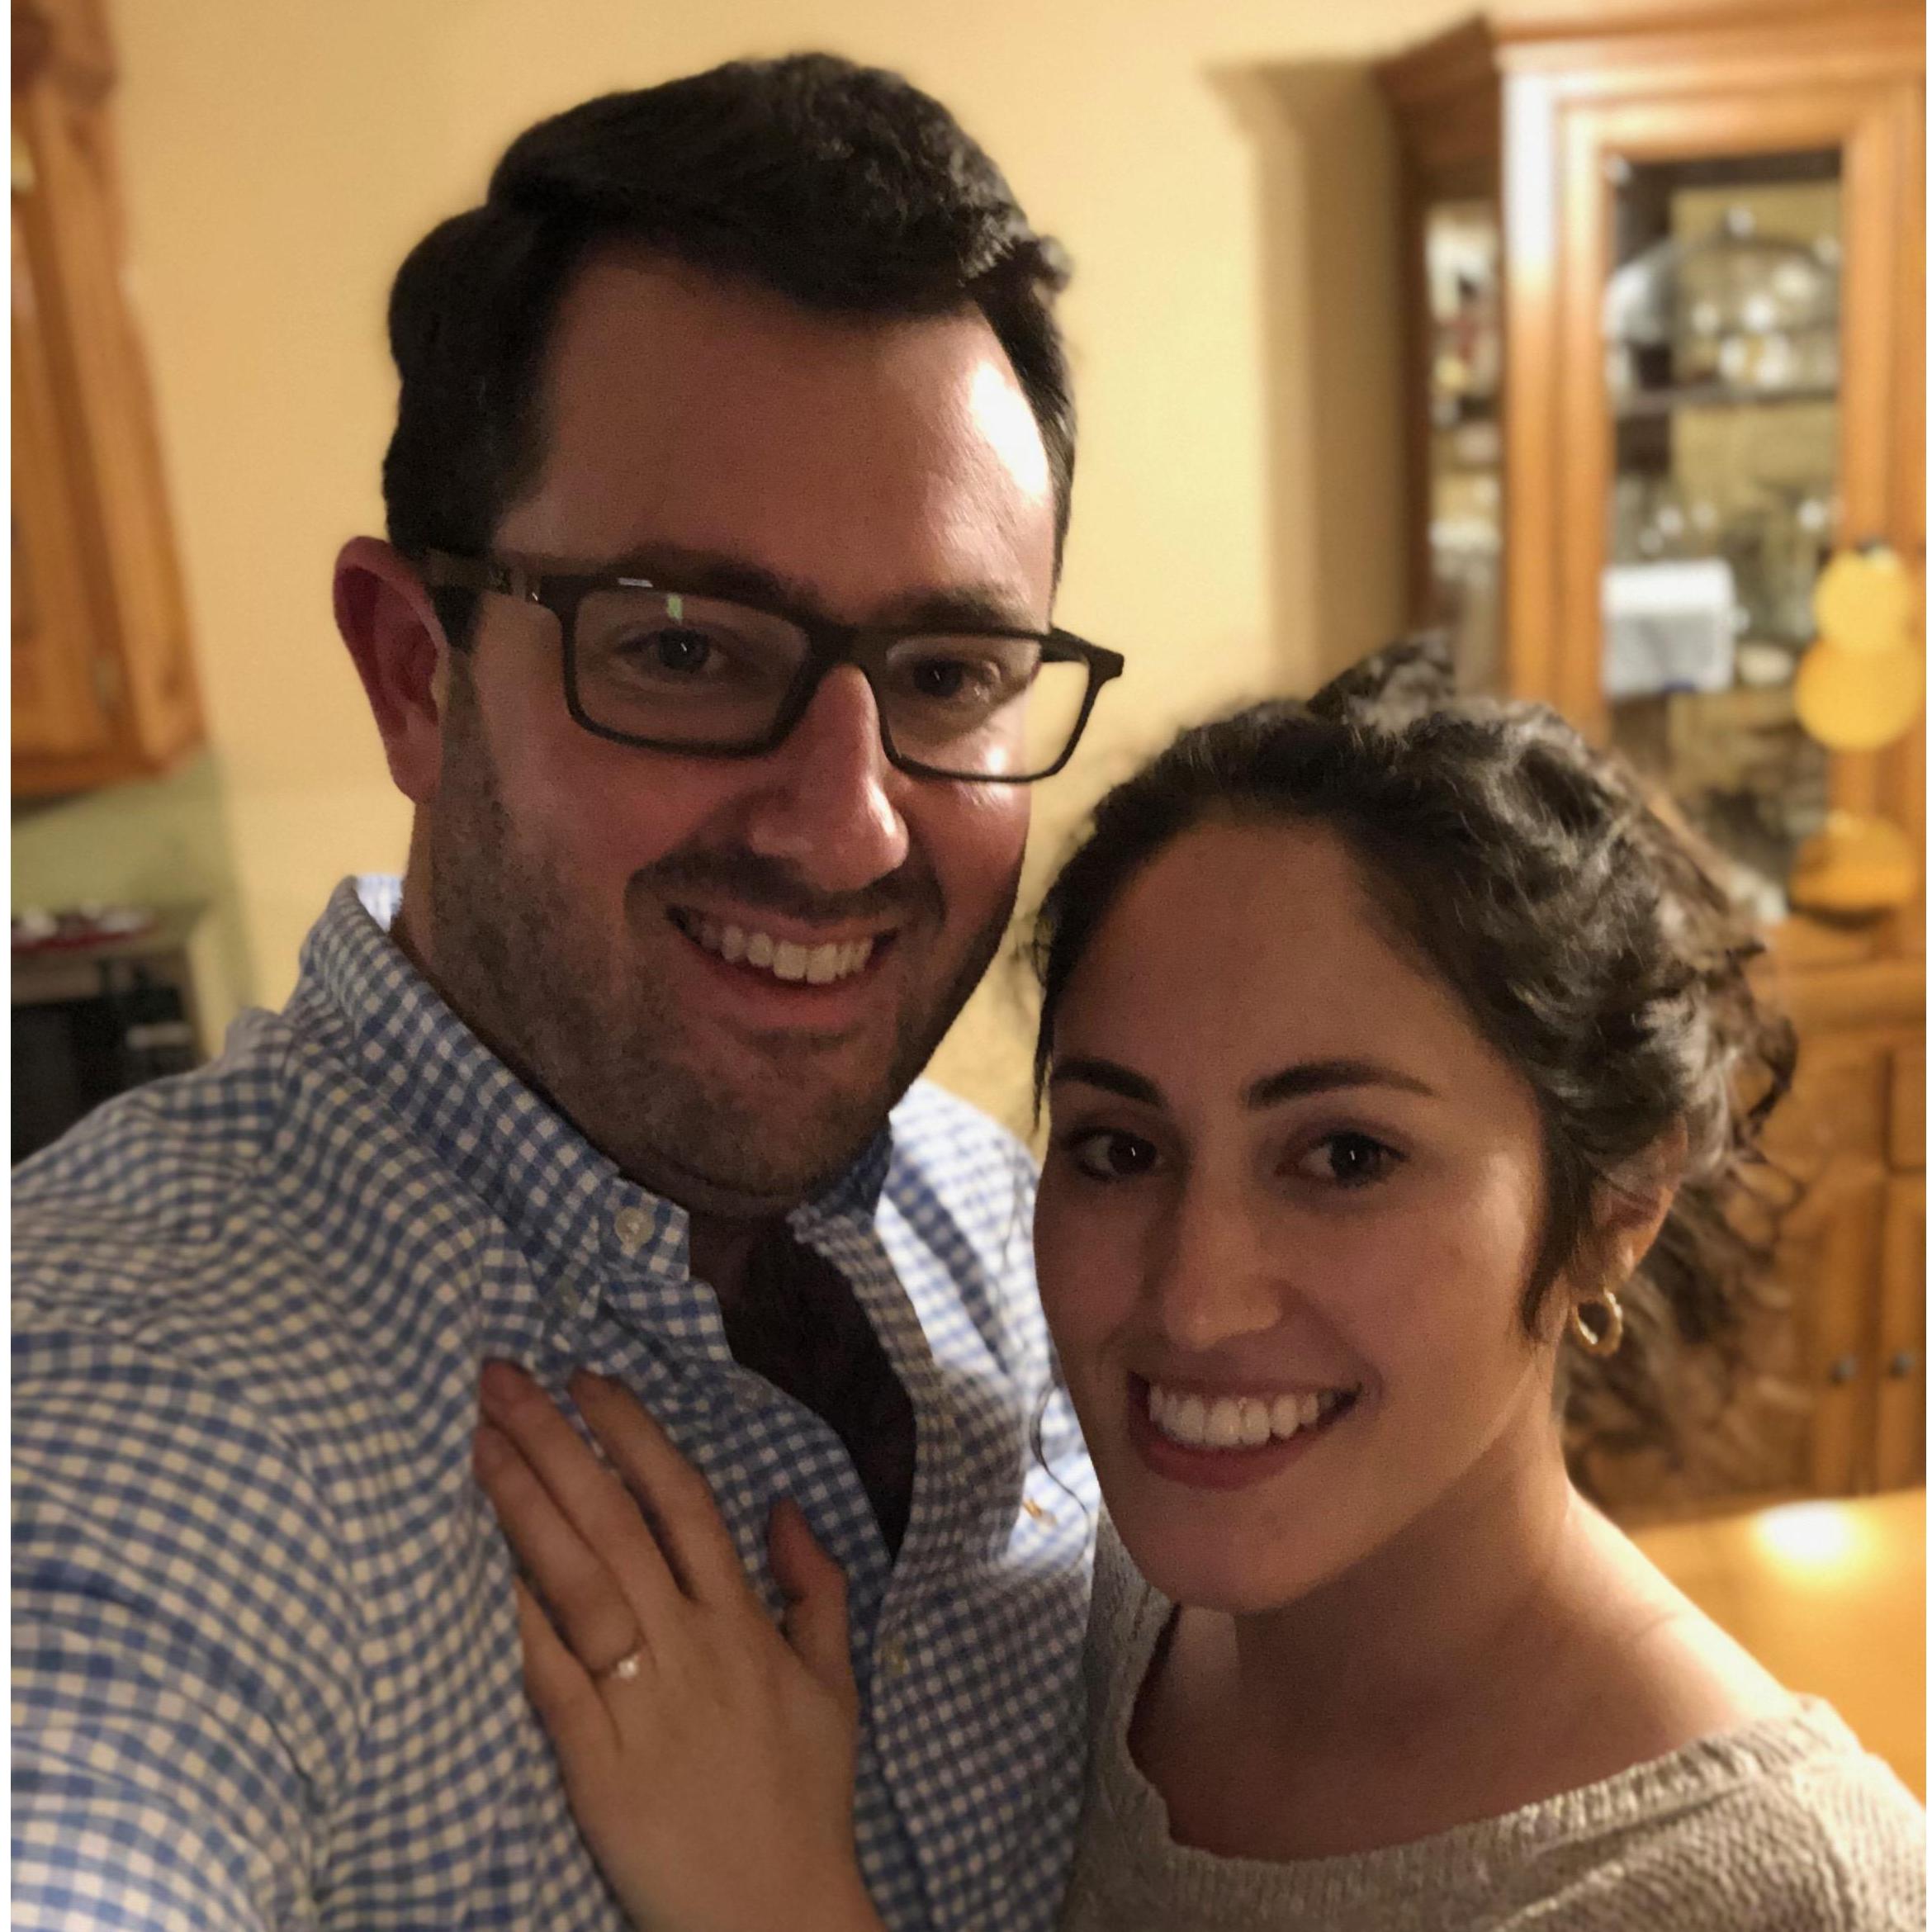 After the Proposal! March 6, 2020